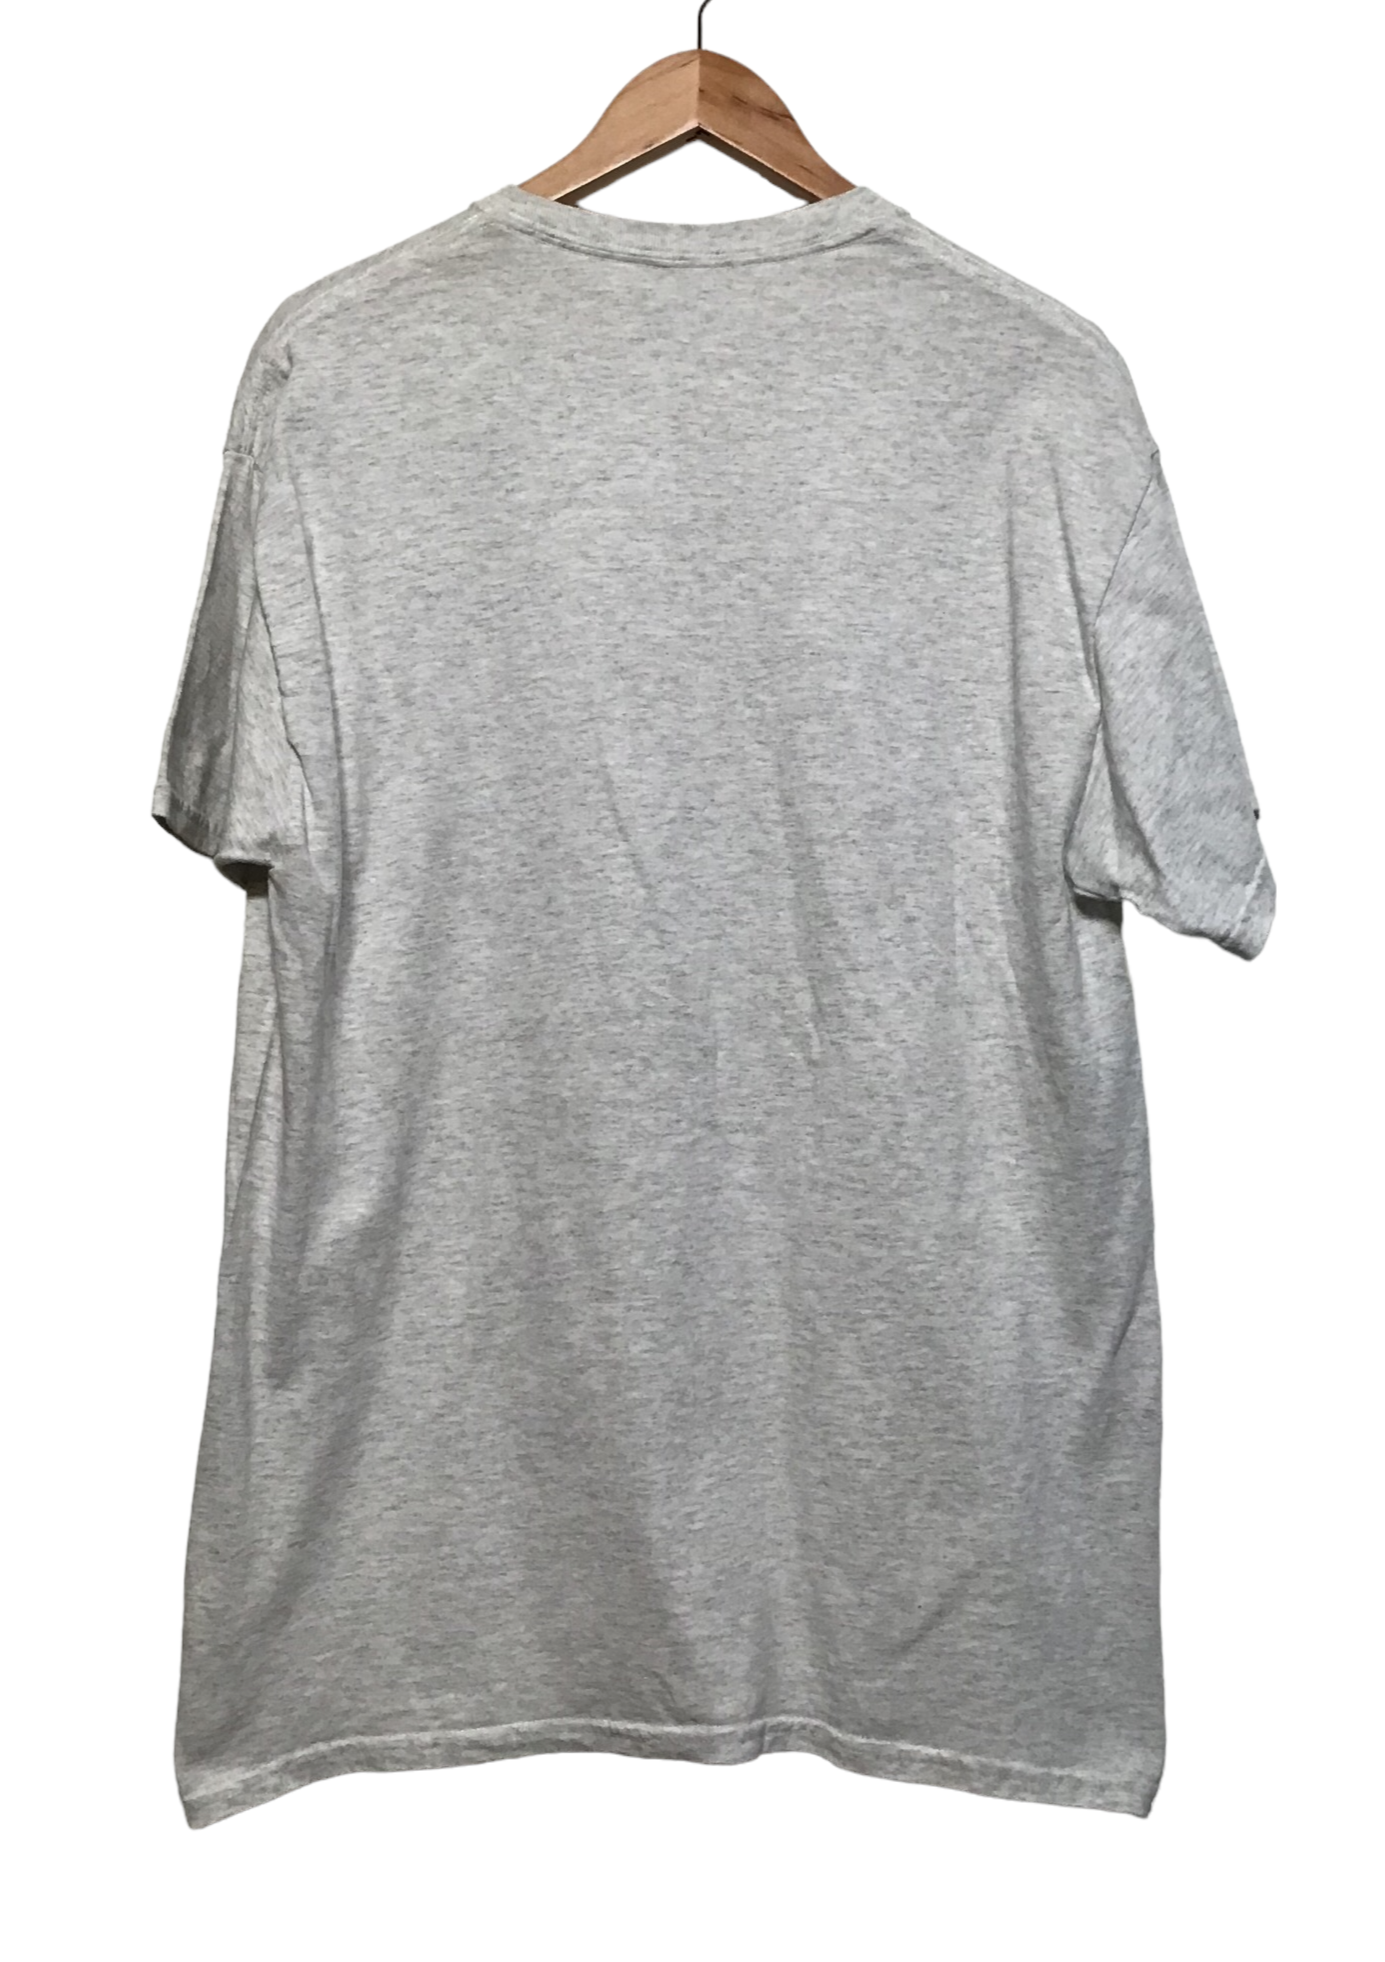 Grey Army Graphic Tee (Size L)